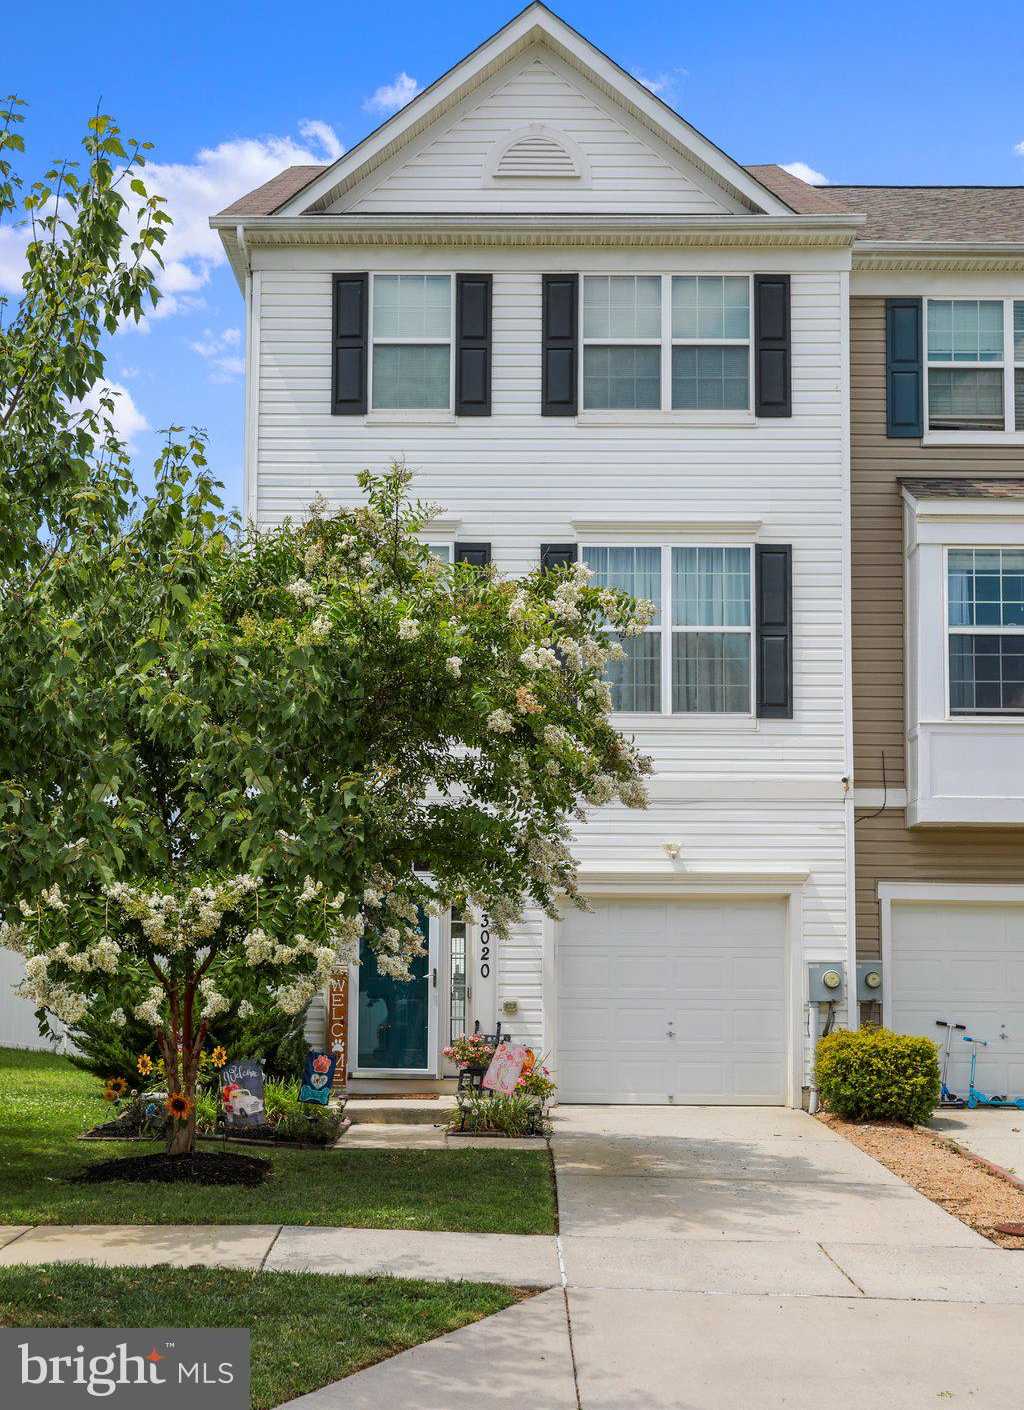 View HAGERSTOWN, MD 21740 townhome